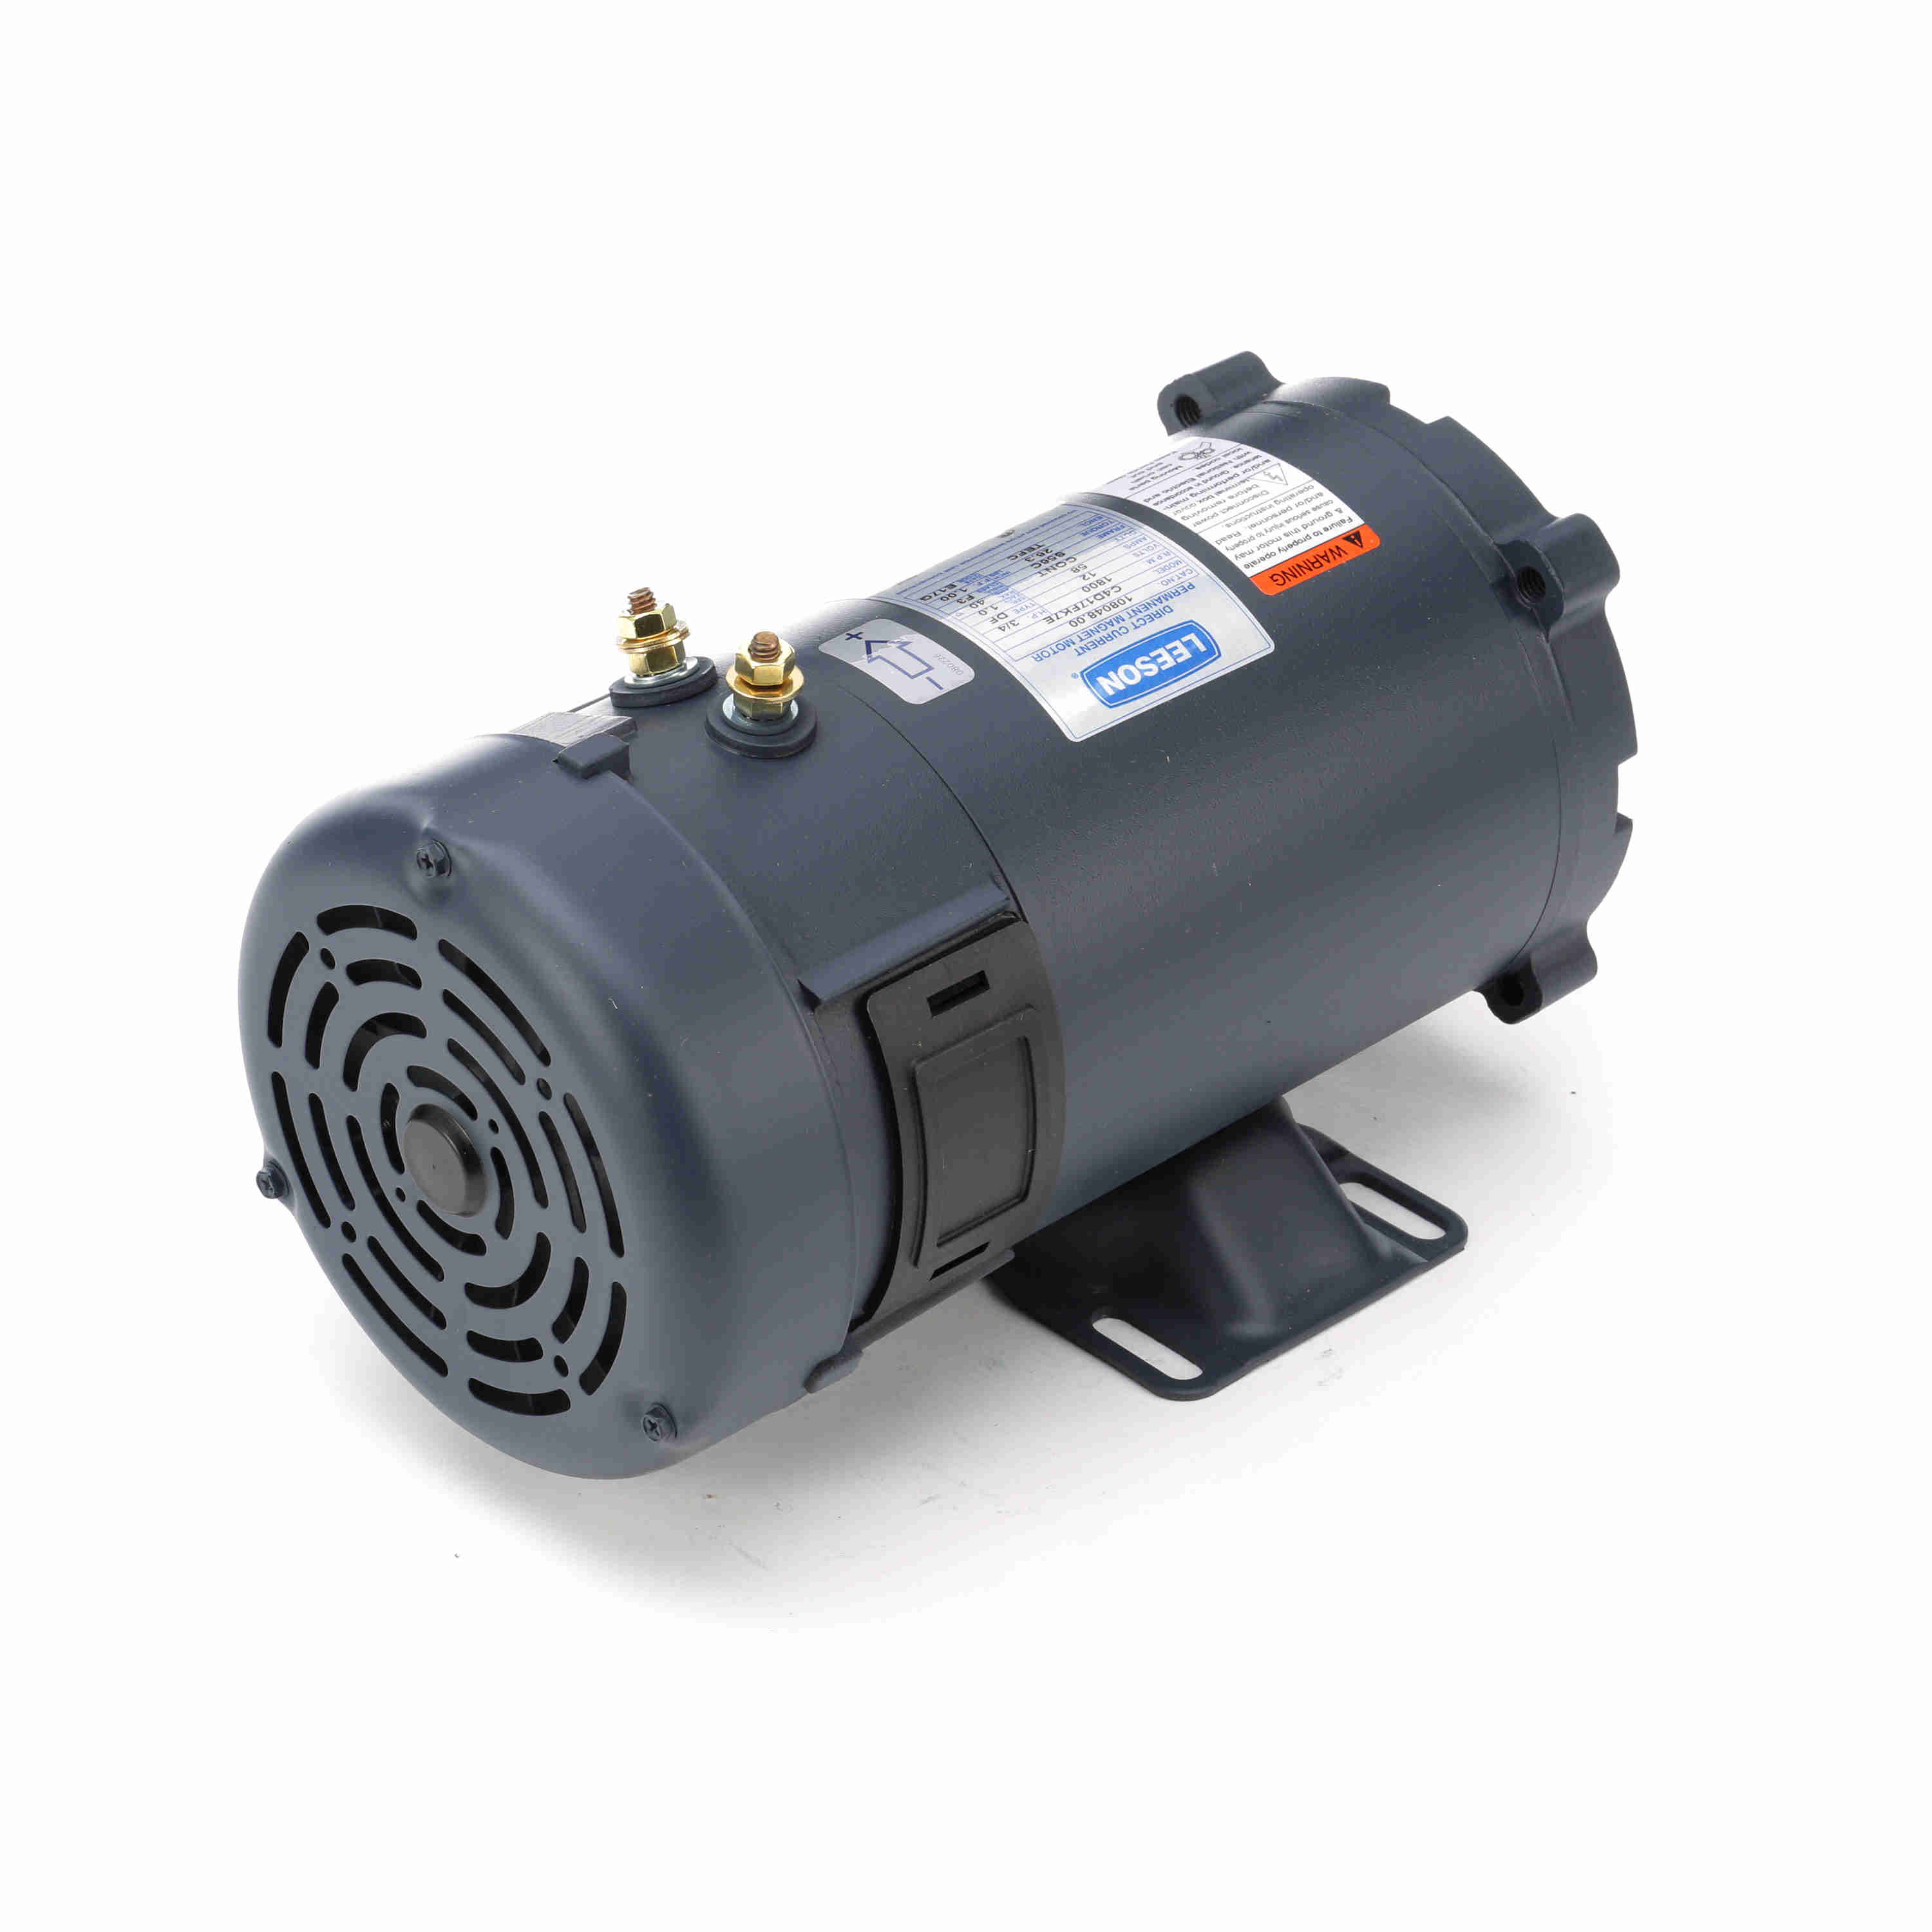 108048.00 Leeson 3/4HP Low Voltage DC Electric Motor, 1800RPM 3